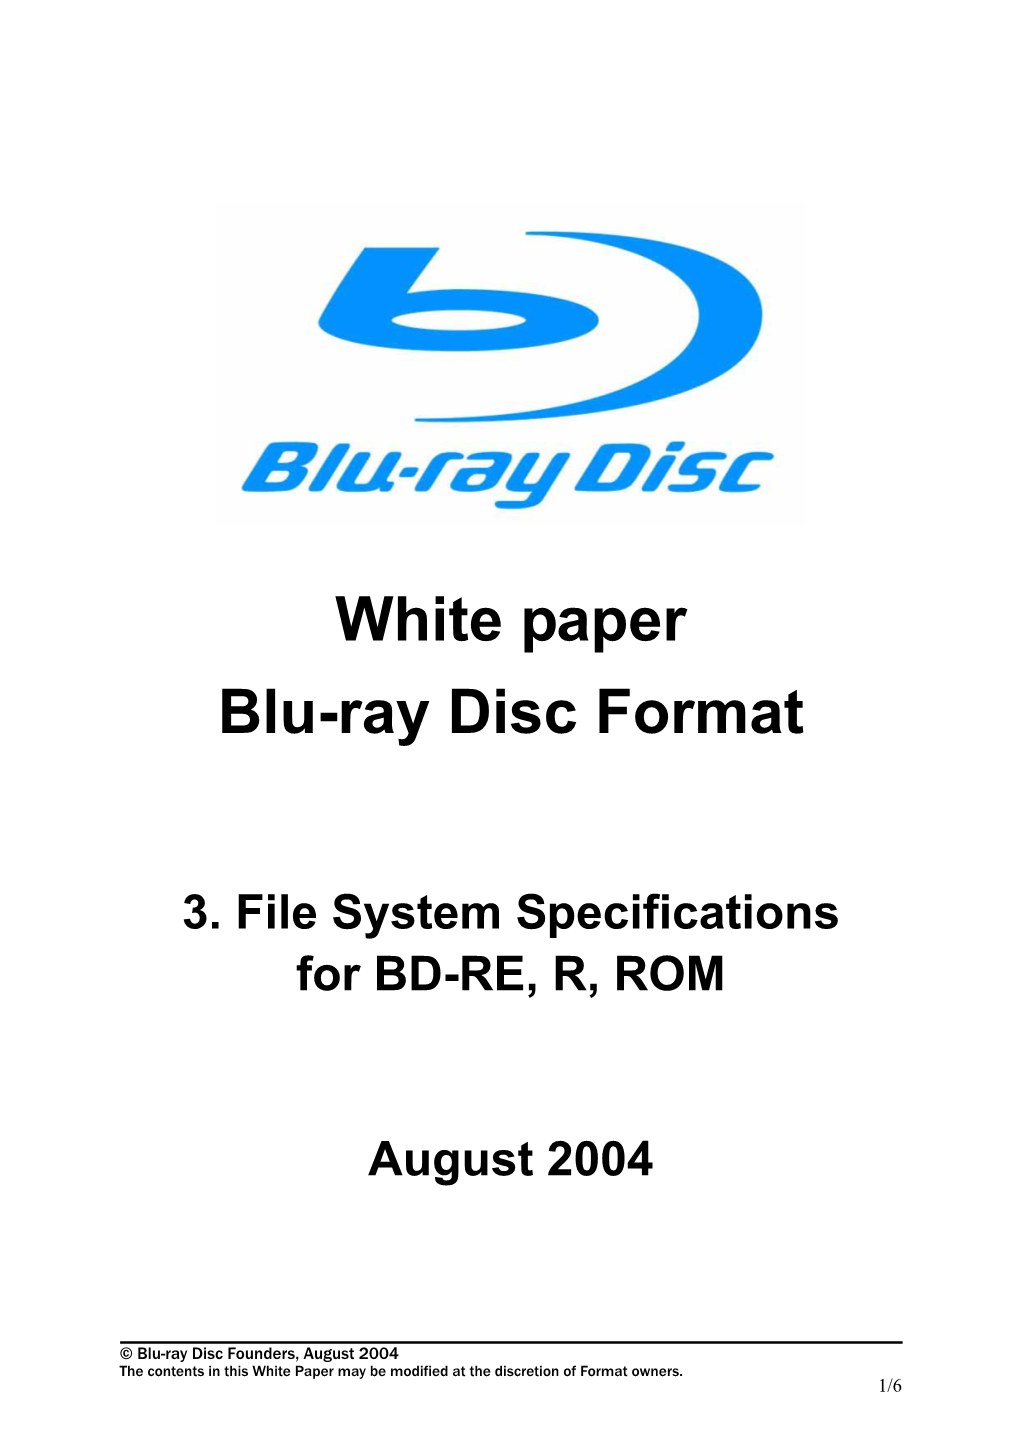 White Paper Blu-Ray Disc Format